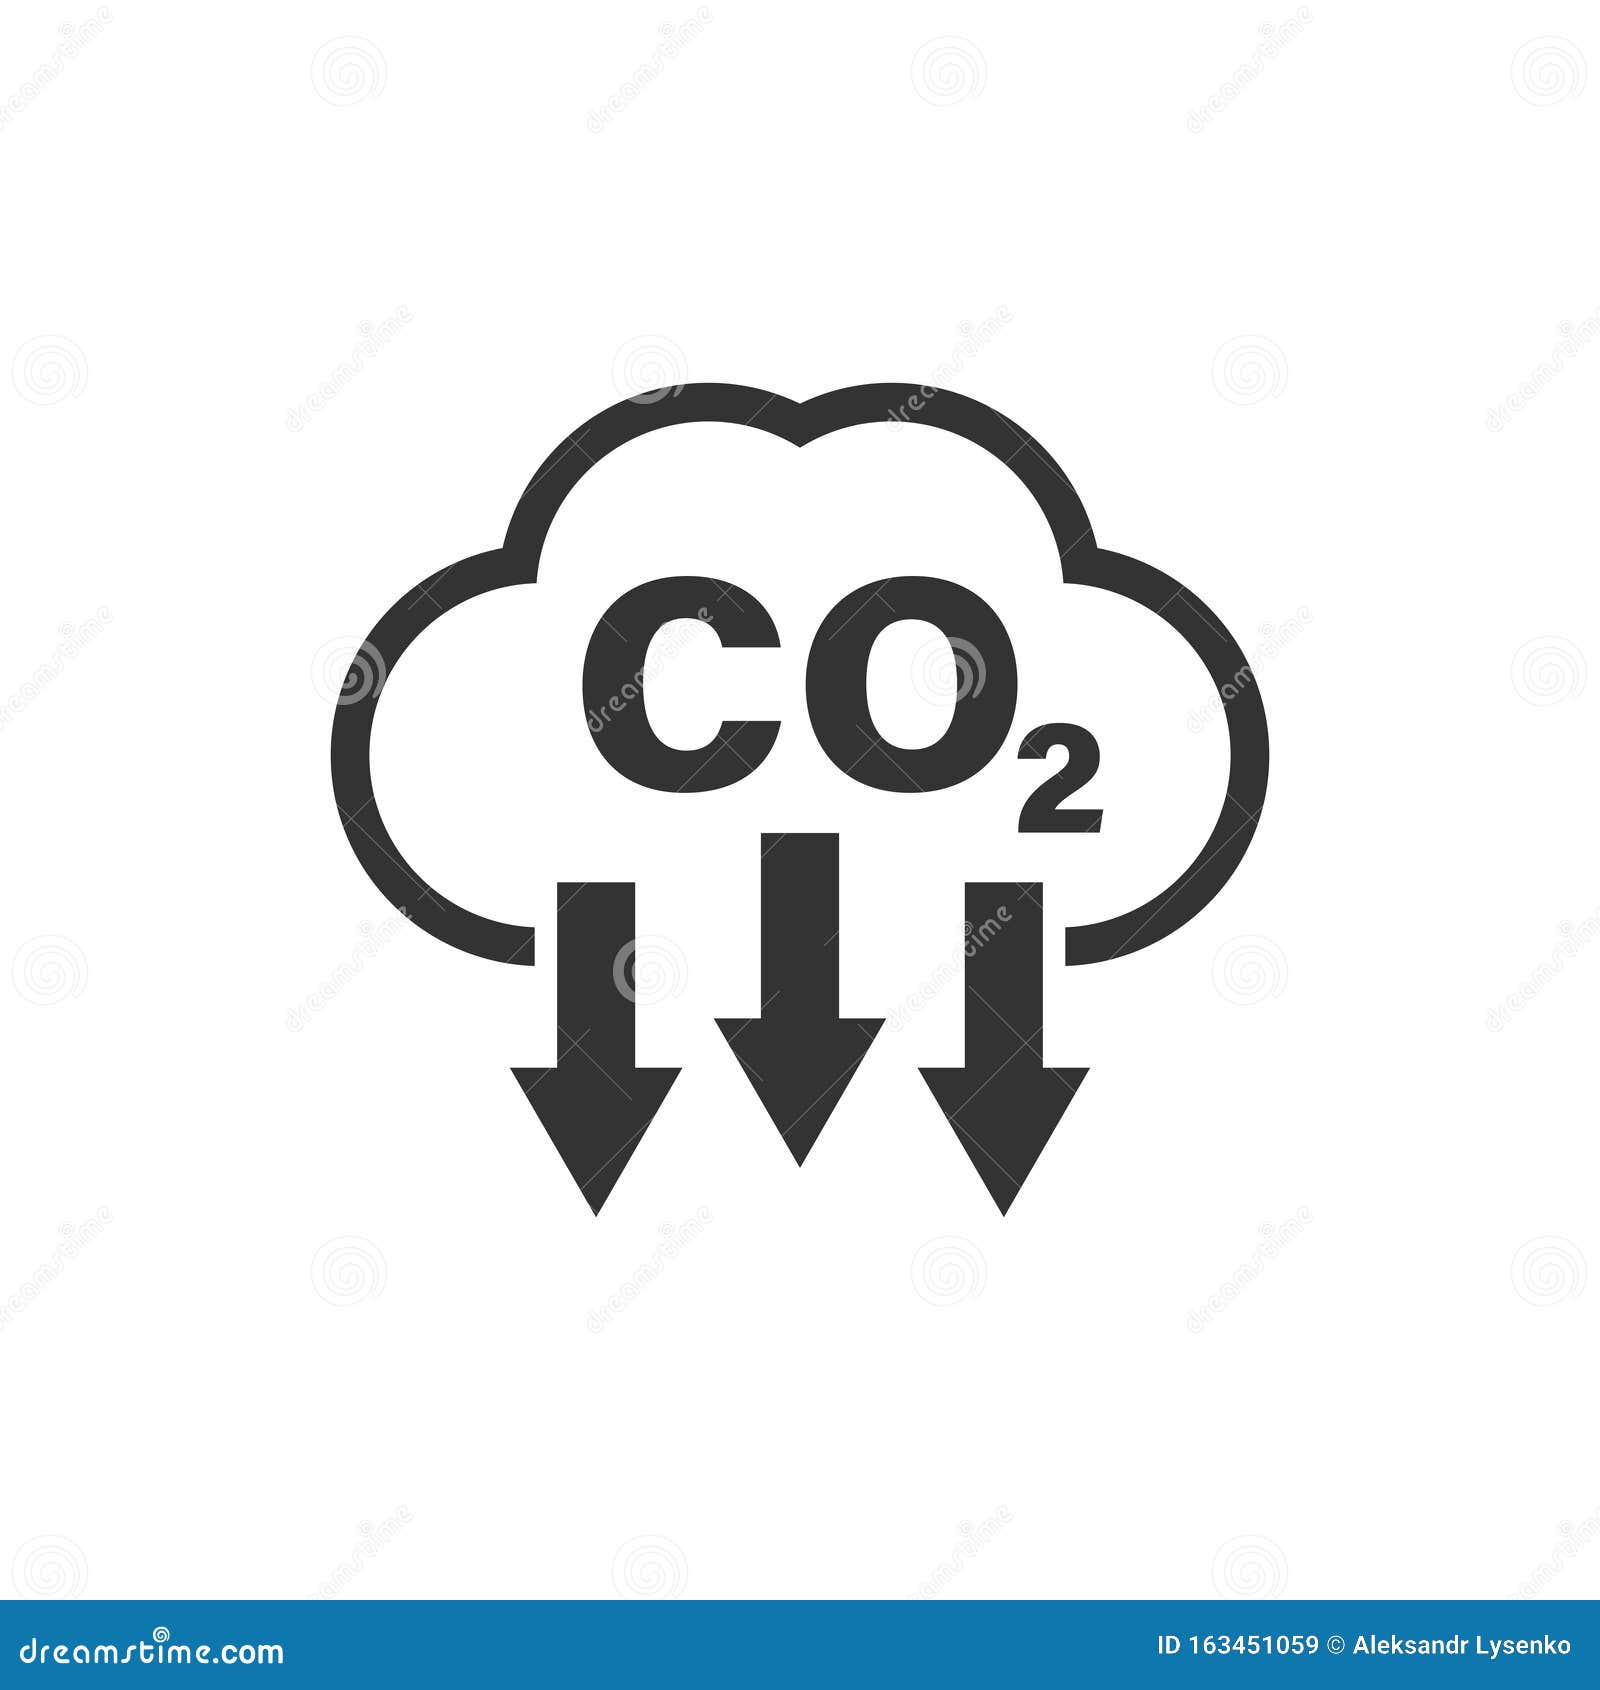 co2 icon in flat style. emission   on white  background. gas reduction business concept